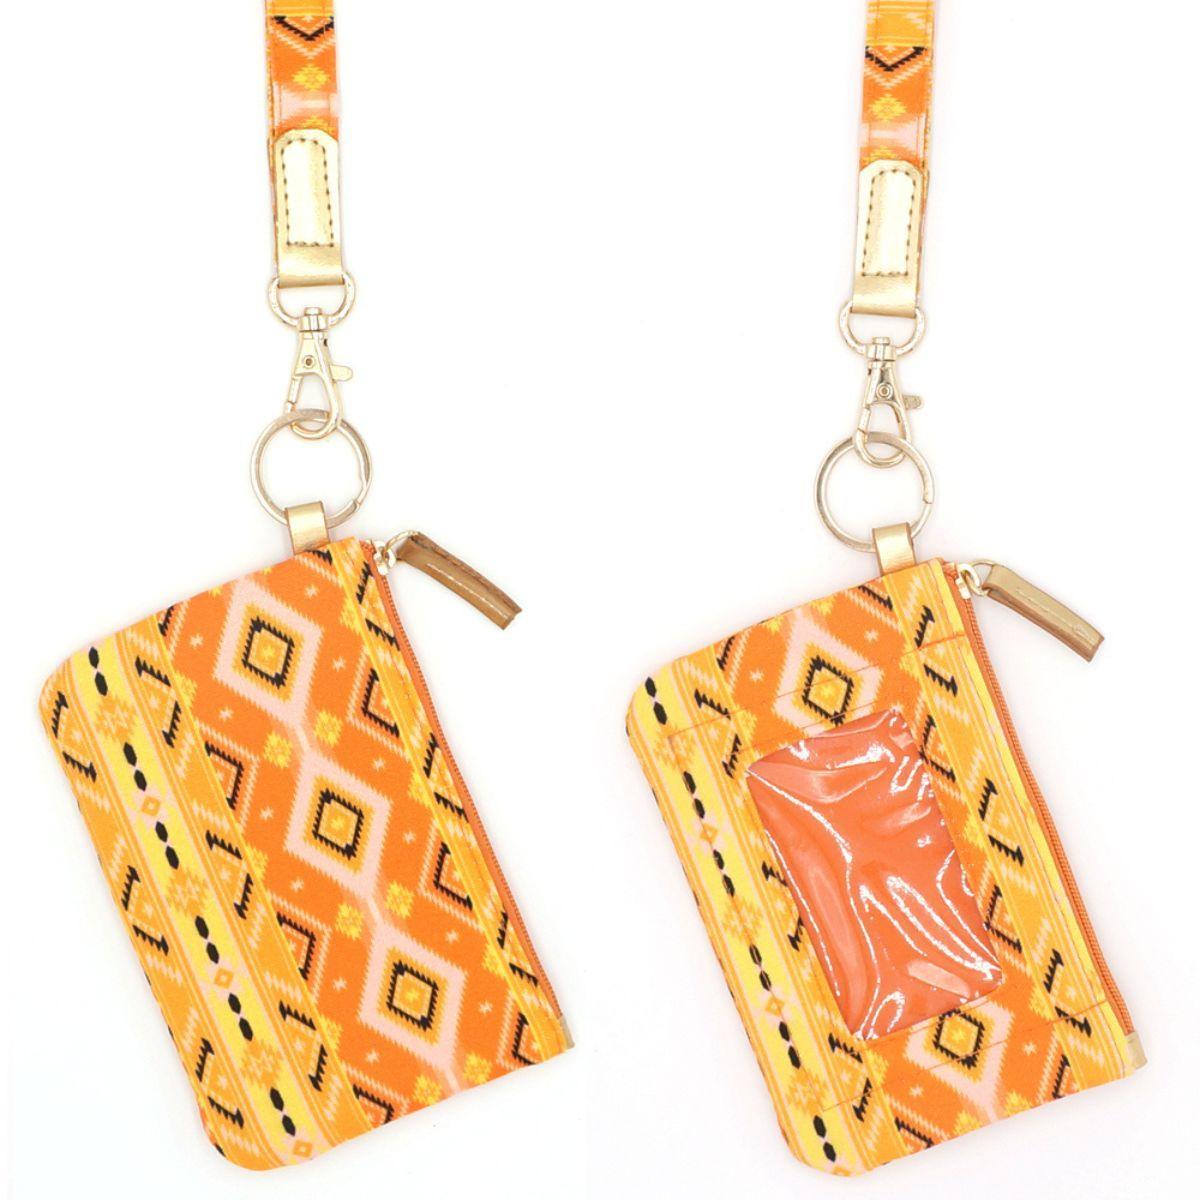 Stylish Tribal ID Wallet for Women: Stay Organized and On-Trend!